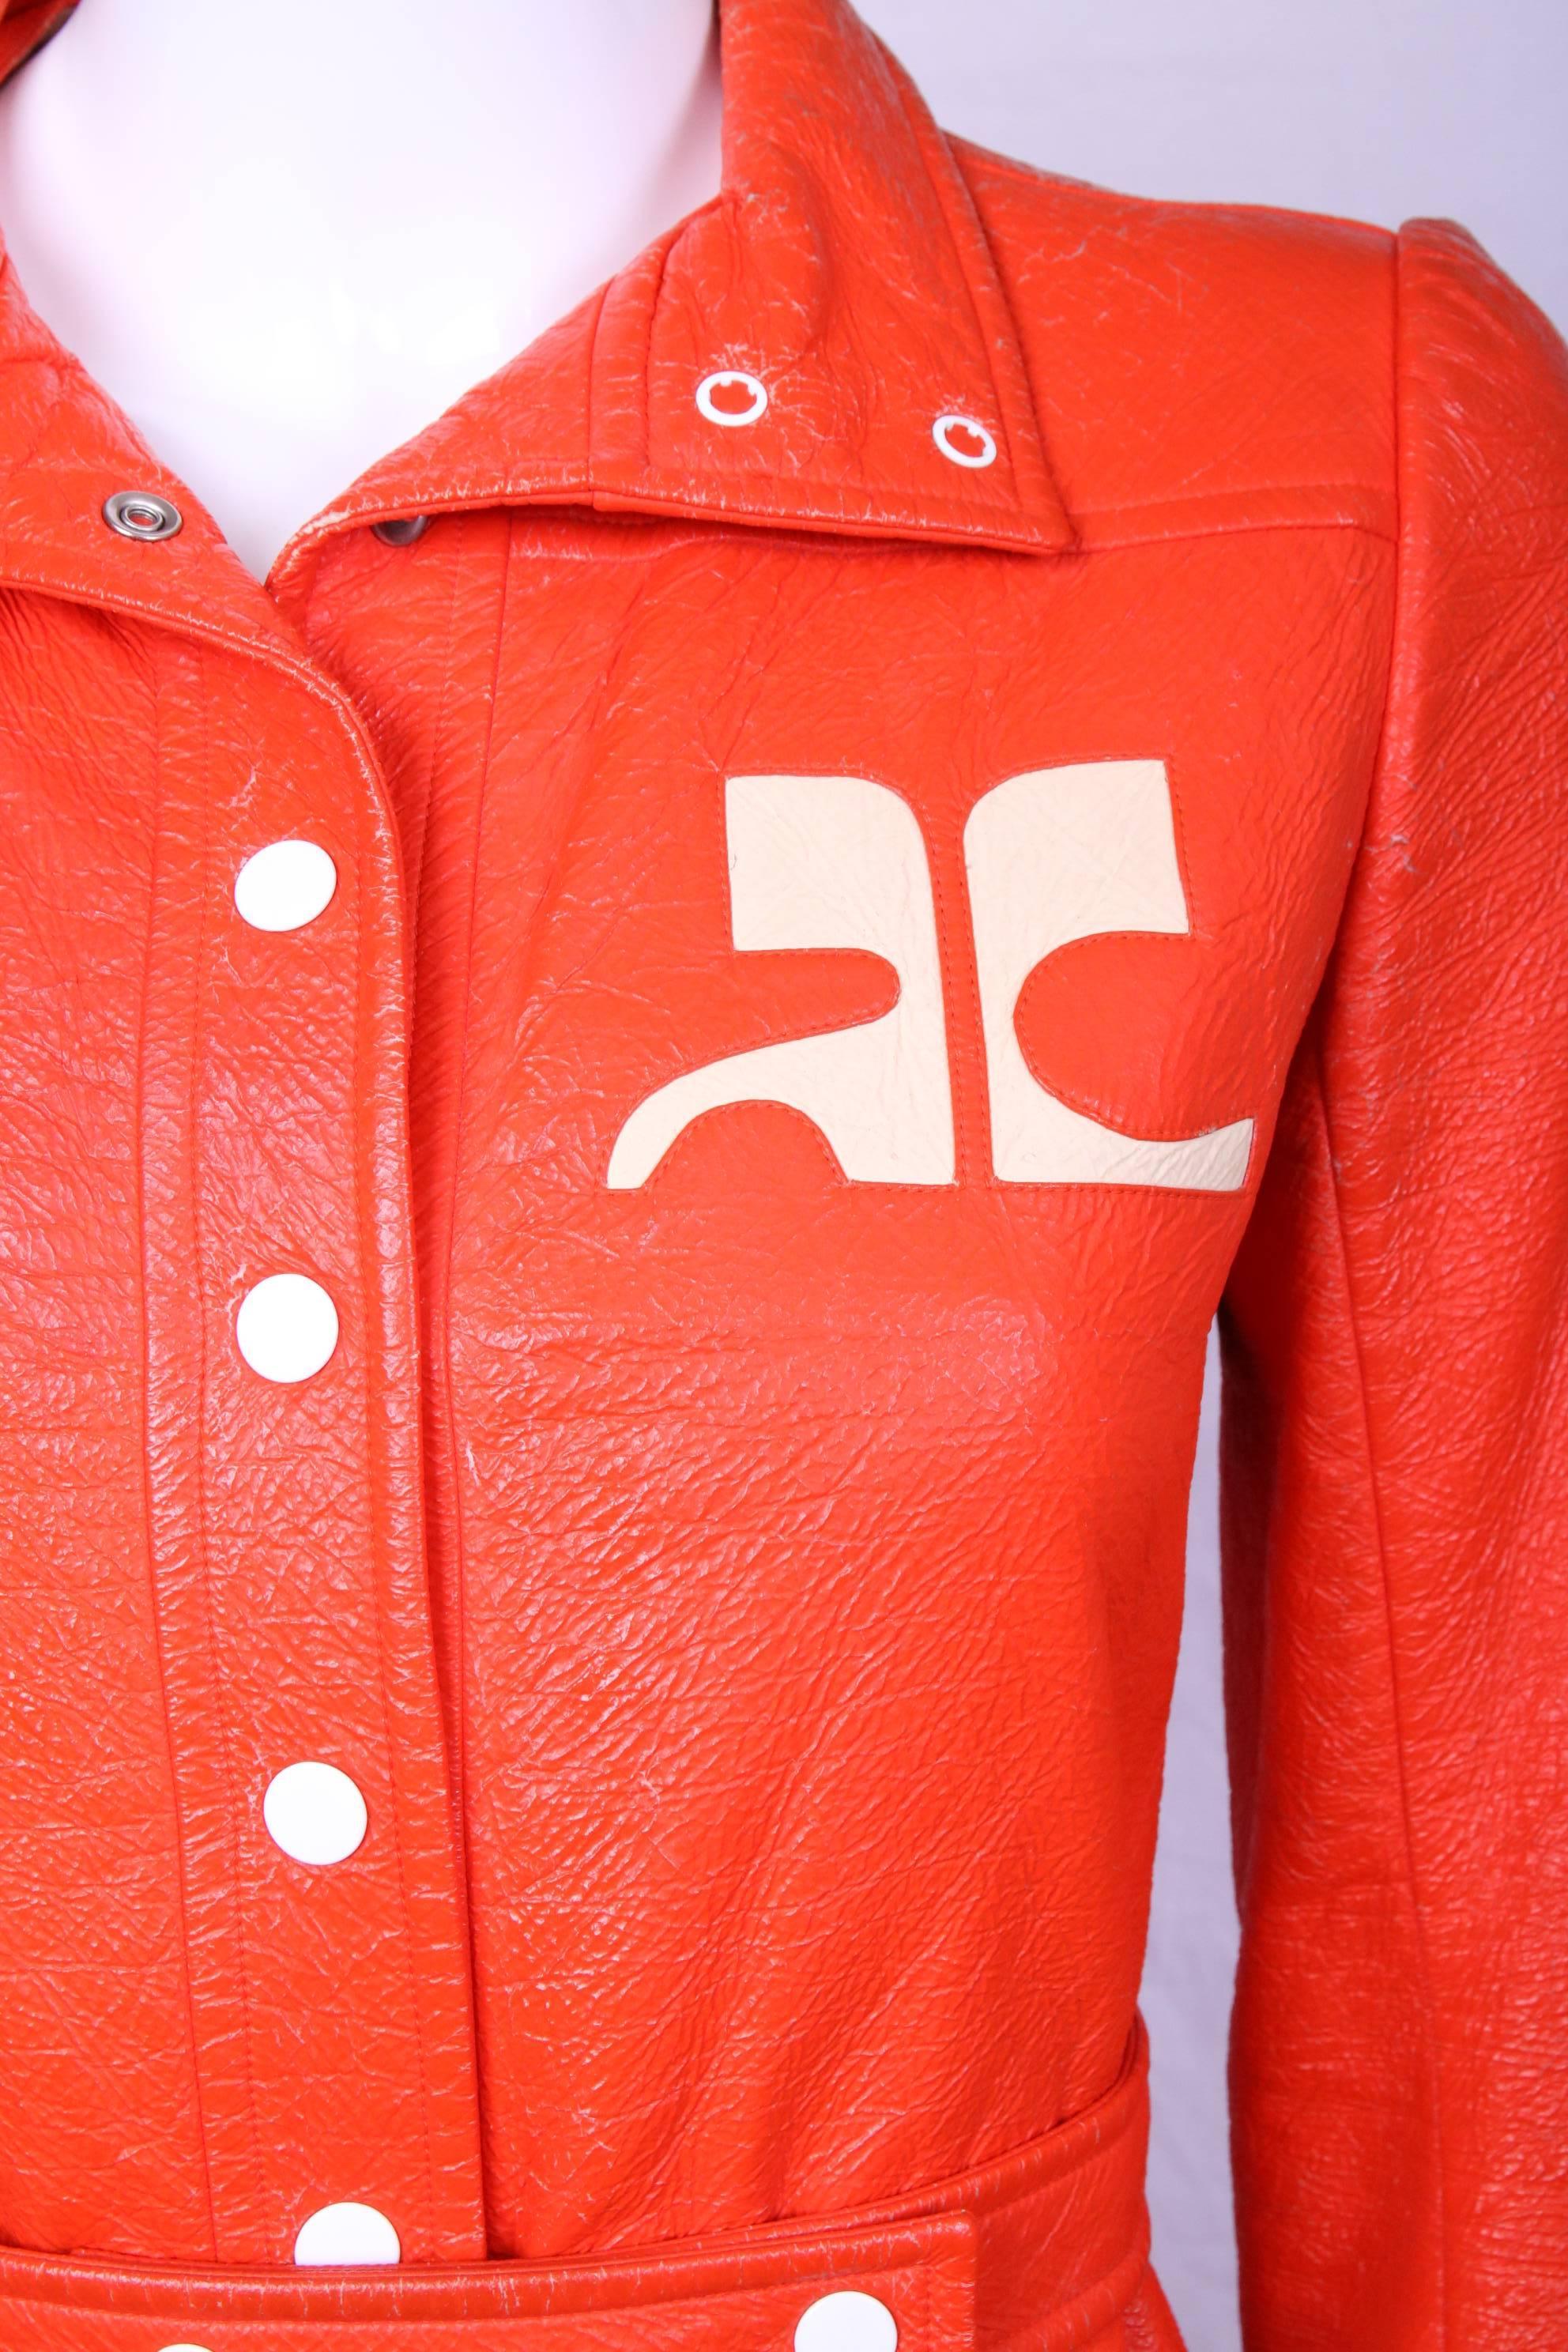 Iconic Courreges orange vinyl overcoat with zippered frontal pockets, white buttons and CC logo. Lined at the interior with Courreges logo print fabric. Size tag 